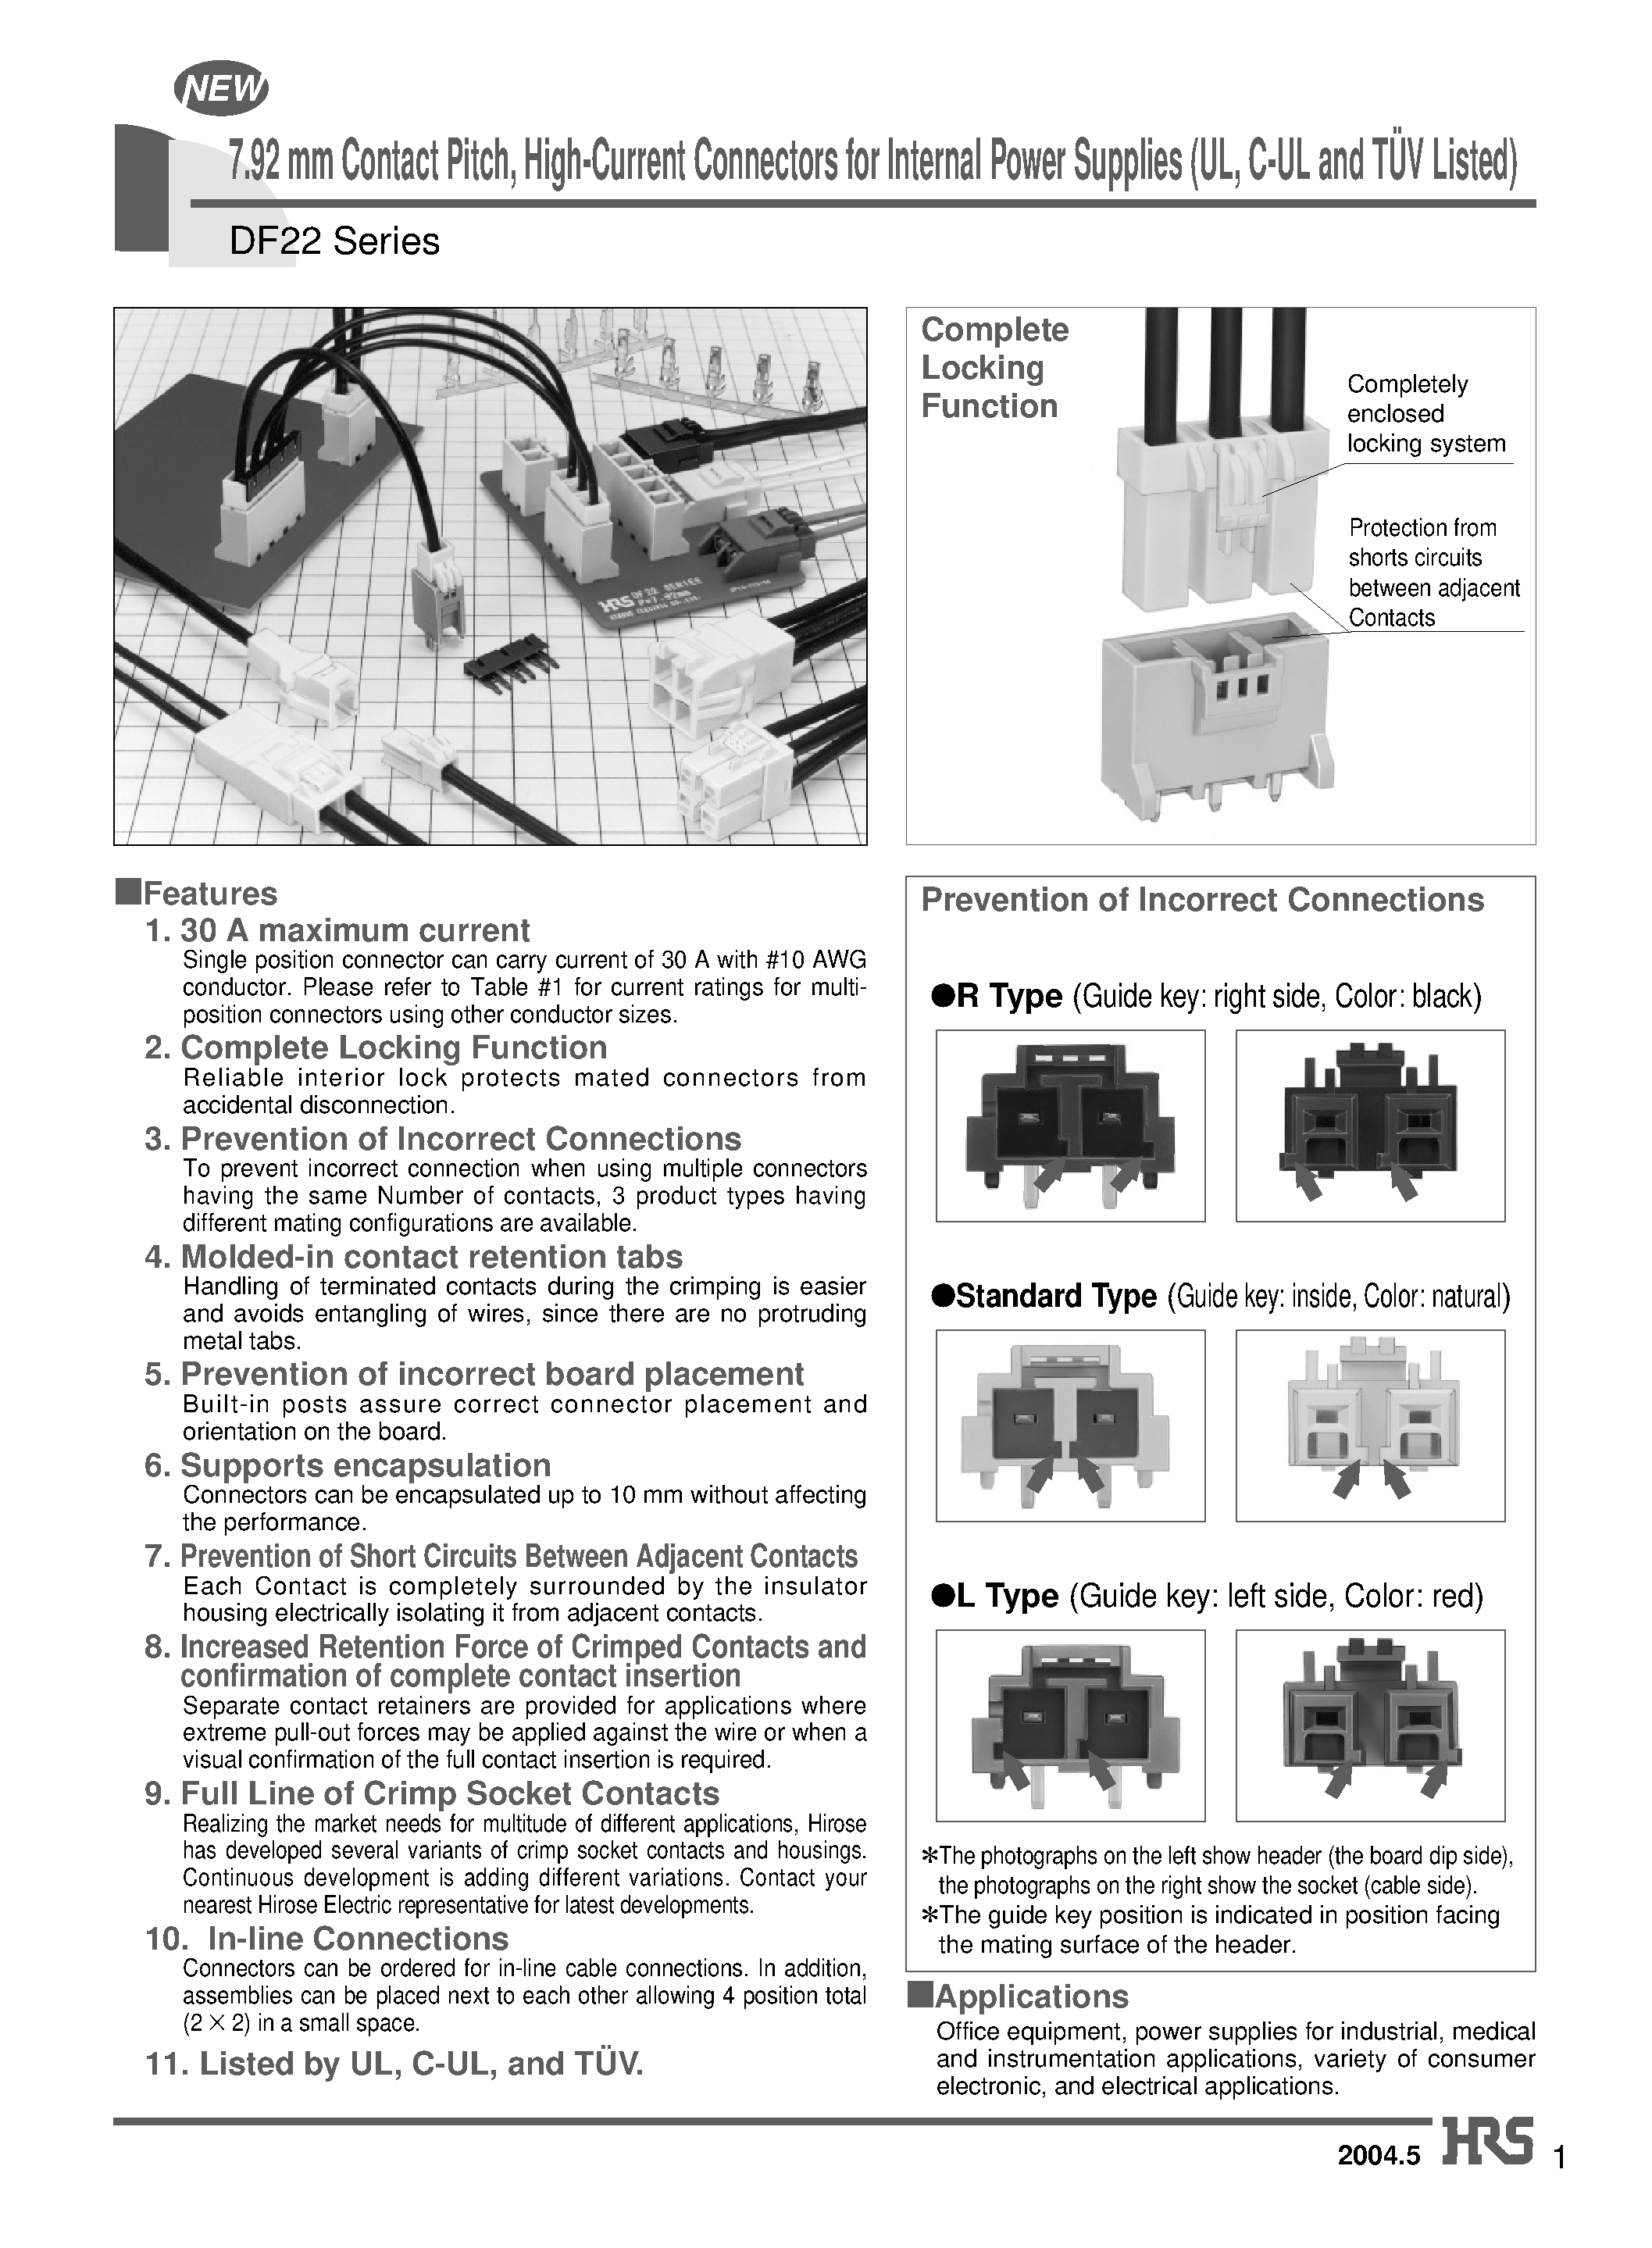 Даташит DF22A-4P-7.92C - 7.92 mm Contact Pitch/ High-Current Connectors for Internal Power Supplies (UL/ C-UL and TUV Listed) страница 1